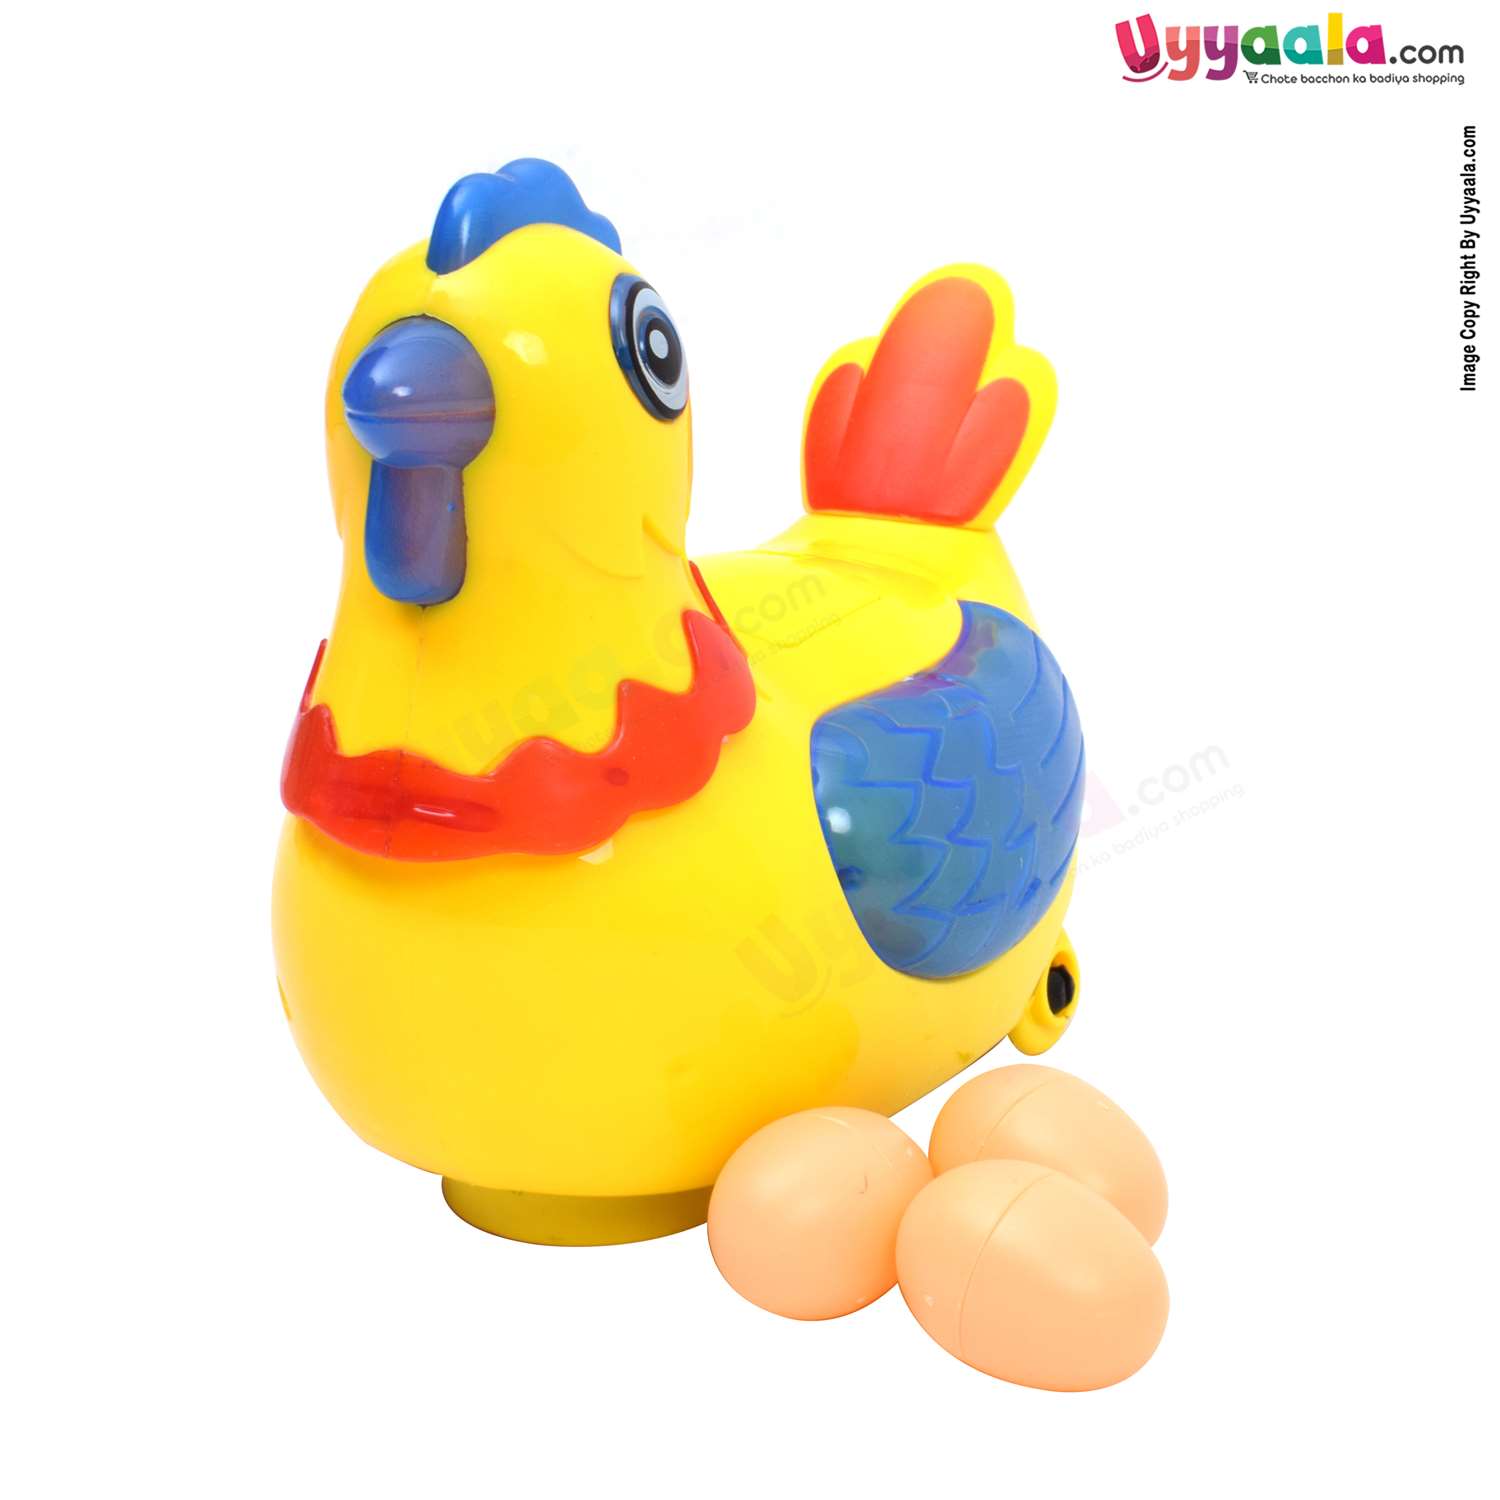 Hen laying eggs battery operated toy for kids